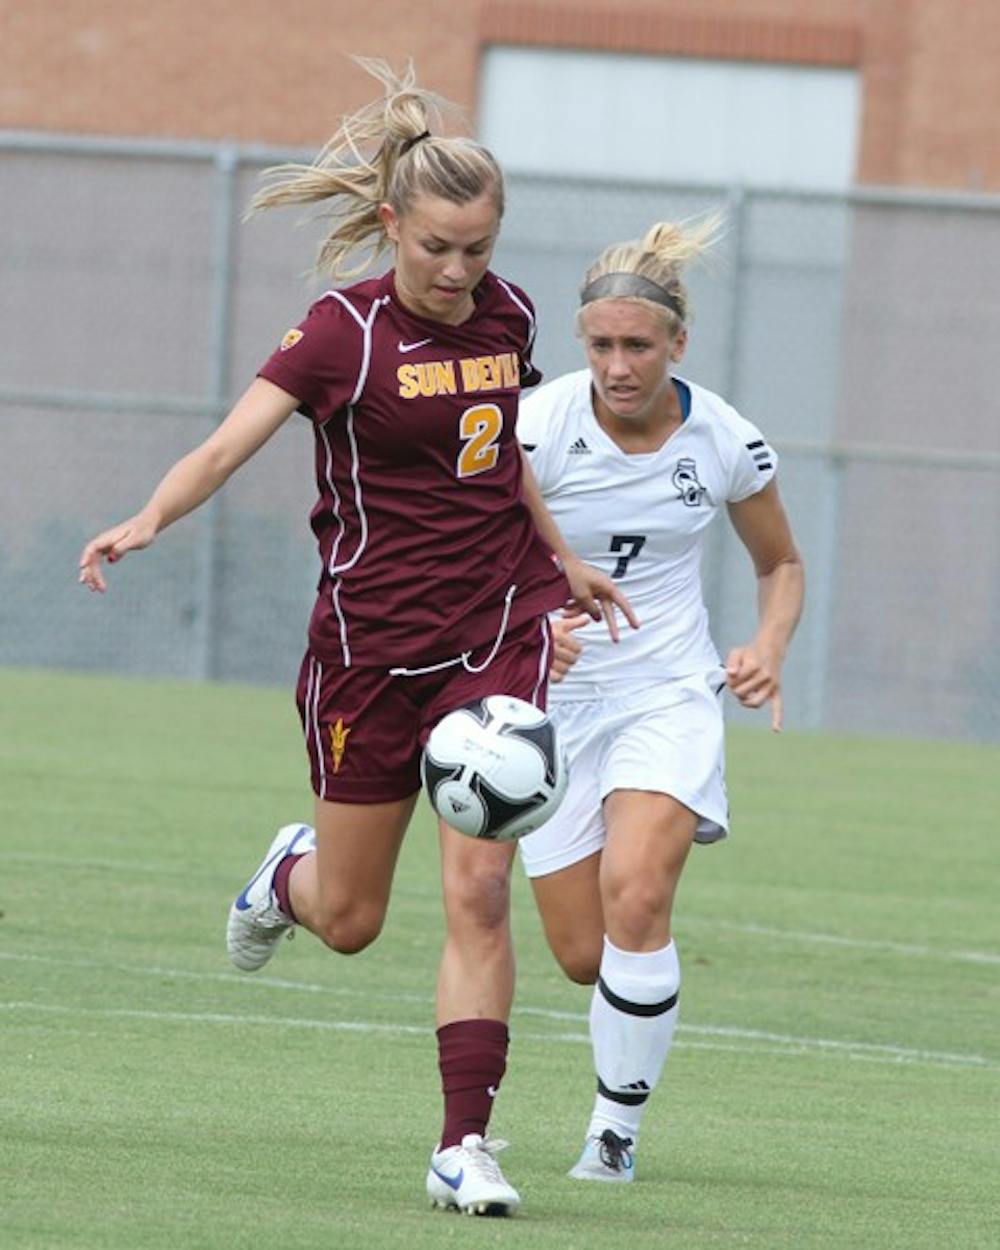 BOUNCE BACK: ASU freshman forward Alexandra Doller gets set to kick the ball away from Old Dominion senior defender Rachael Carroll on Sunday. The Sun Devils fell to 2-2 after losing to both the Monarchs and No. 4 Virginia on the first road trip of the season. (Photo courtesy of Steve Rodriguez)